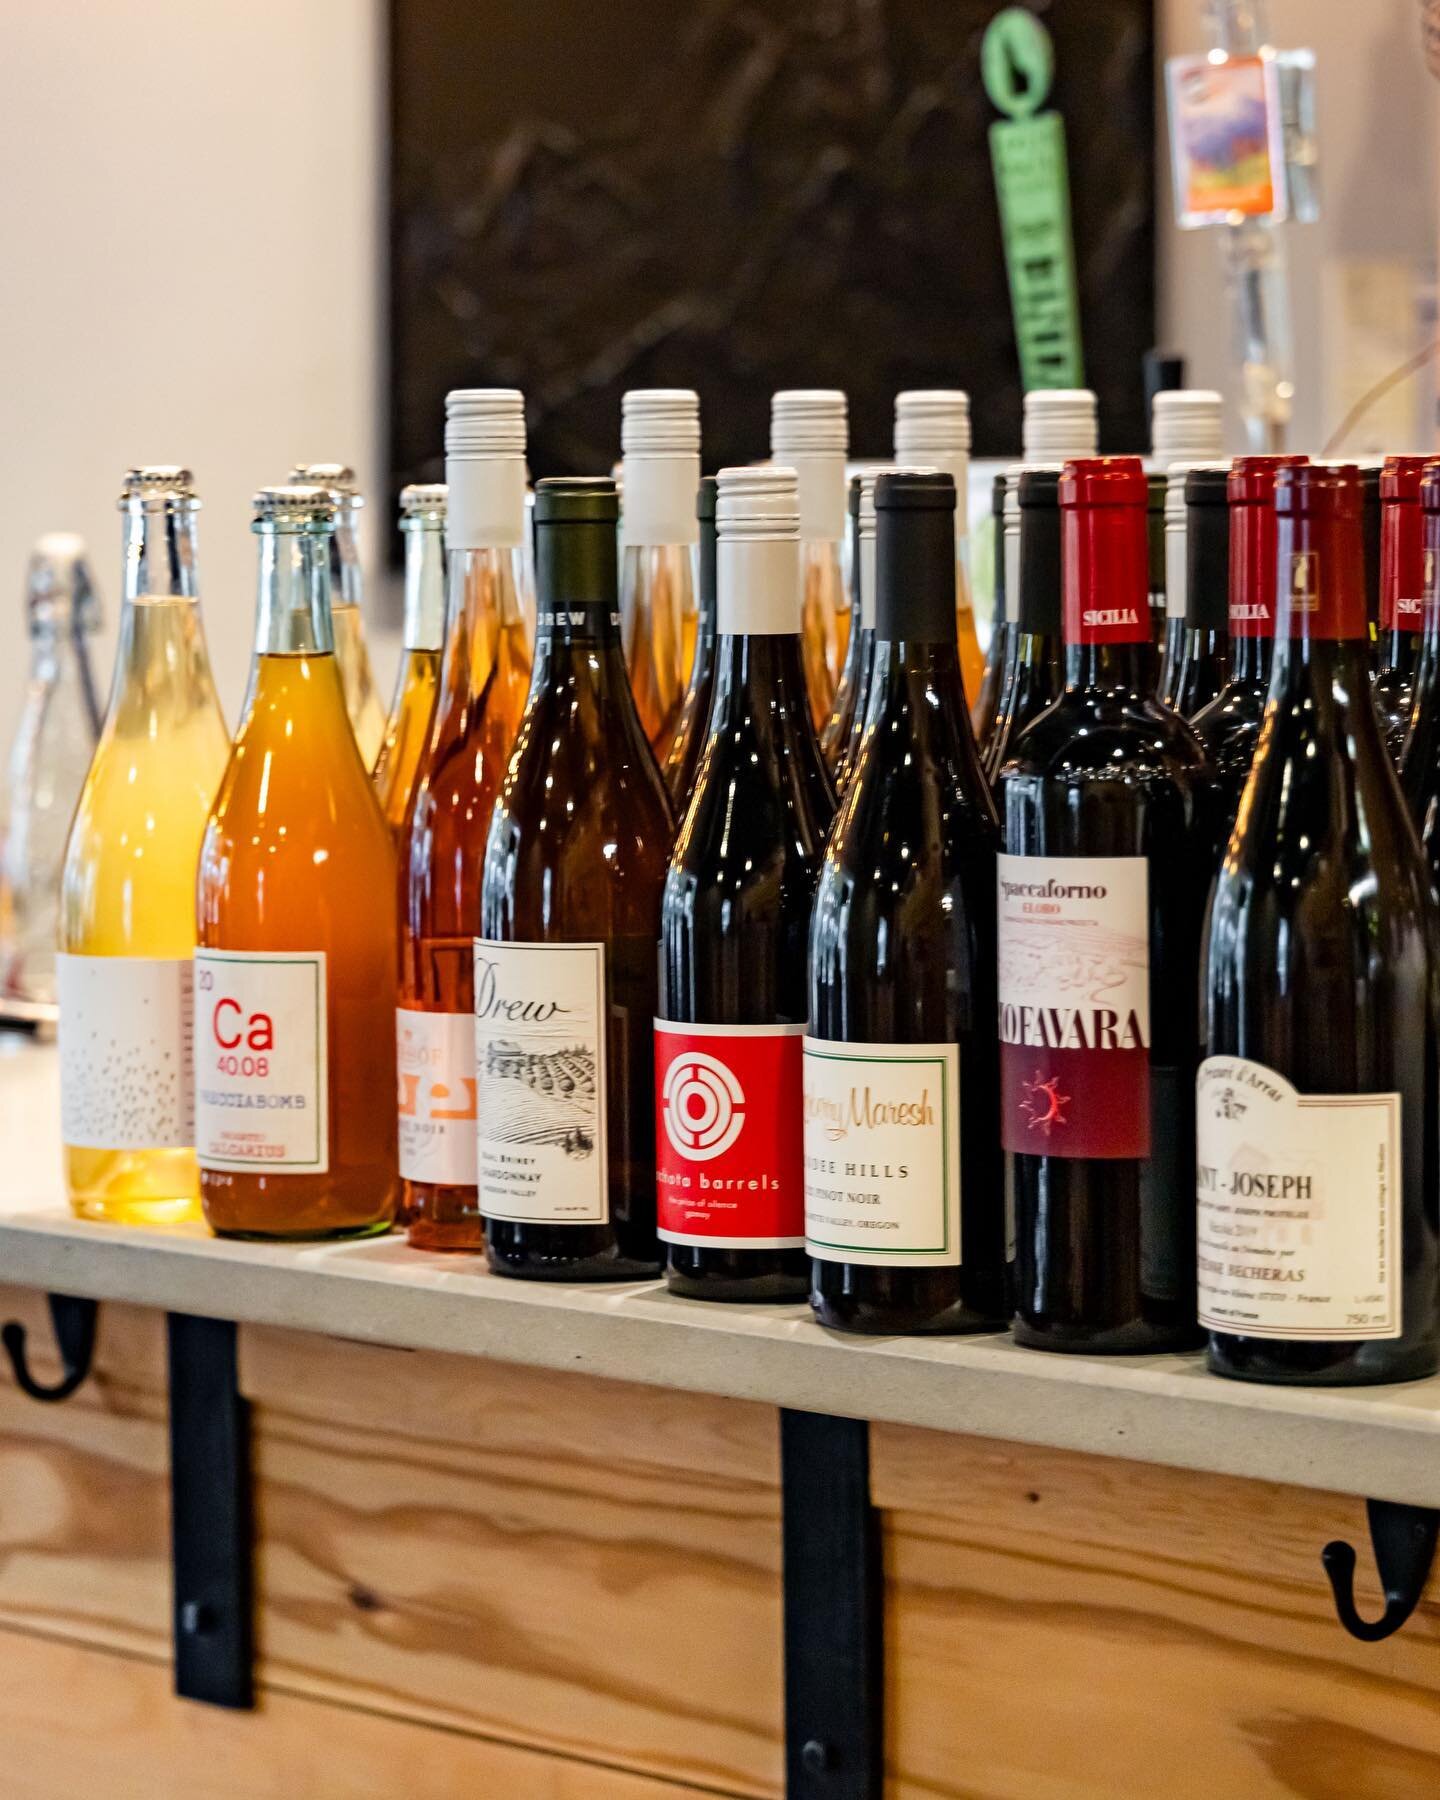 🌈🍷 Check out the colorful and vibrant wine lineup that we showcased during our Taste The Rainbow Wine Class. These rainbow-inspired wines are the perfect way to celebrate #pridemonth in a unique and exciting way!

🌈 Rainbow Wines:
⚪ Broc Cellars '